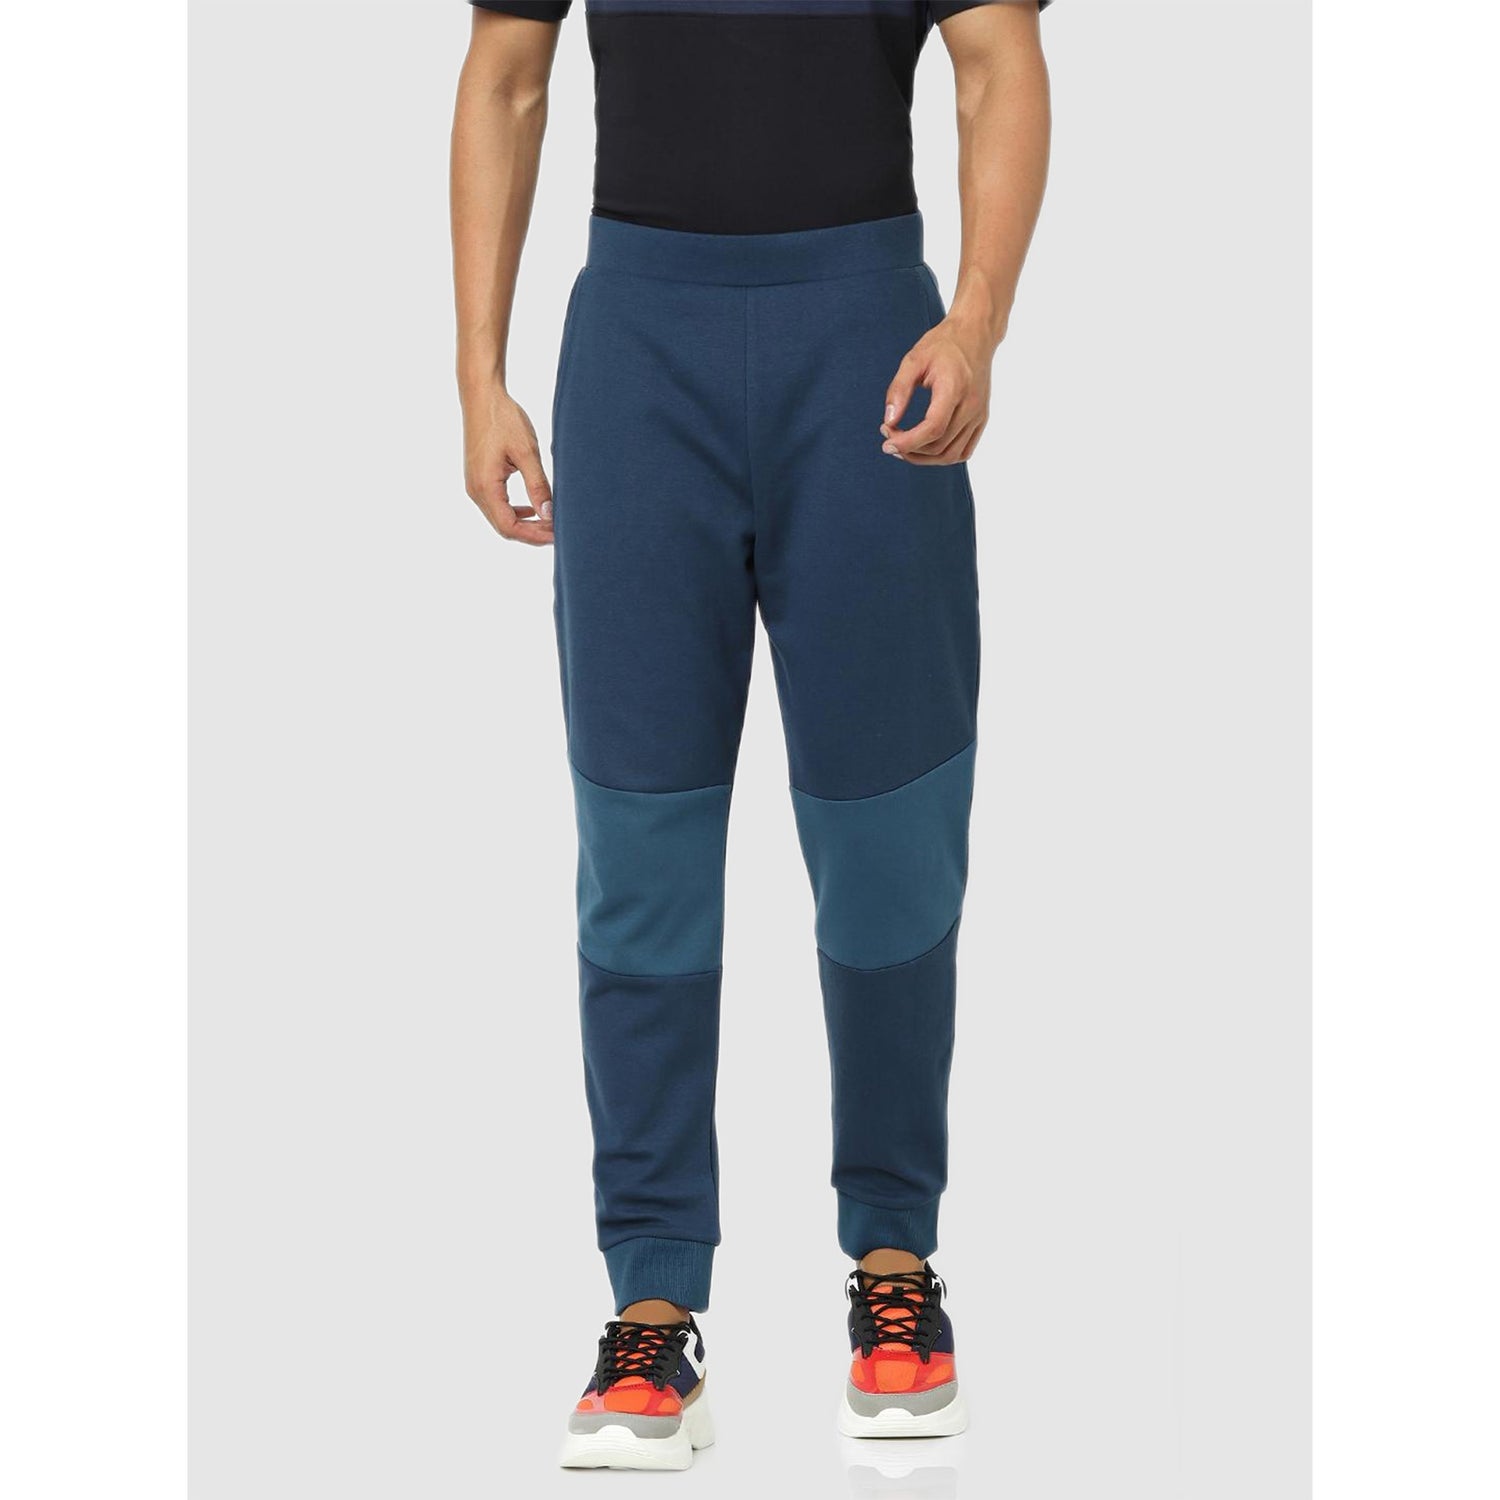 Navy Color Regular Fit Block Trousers (Various Sizes)